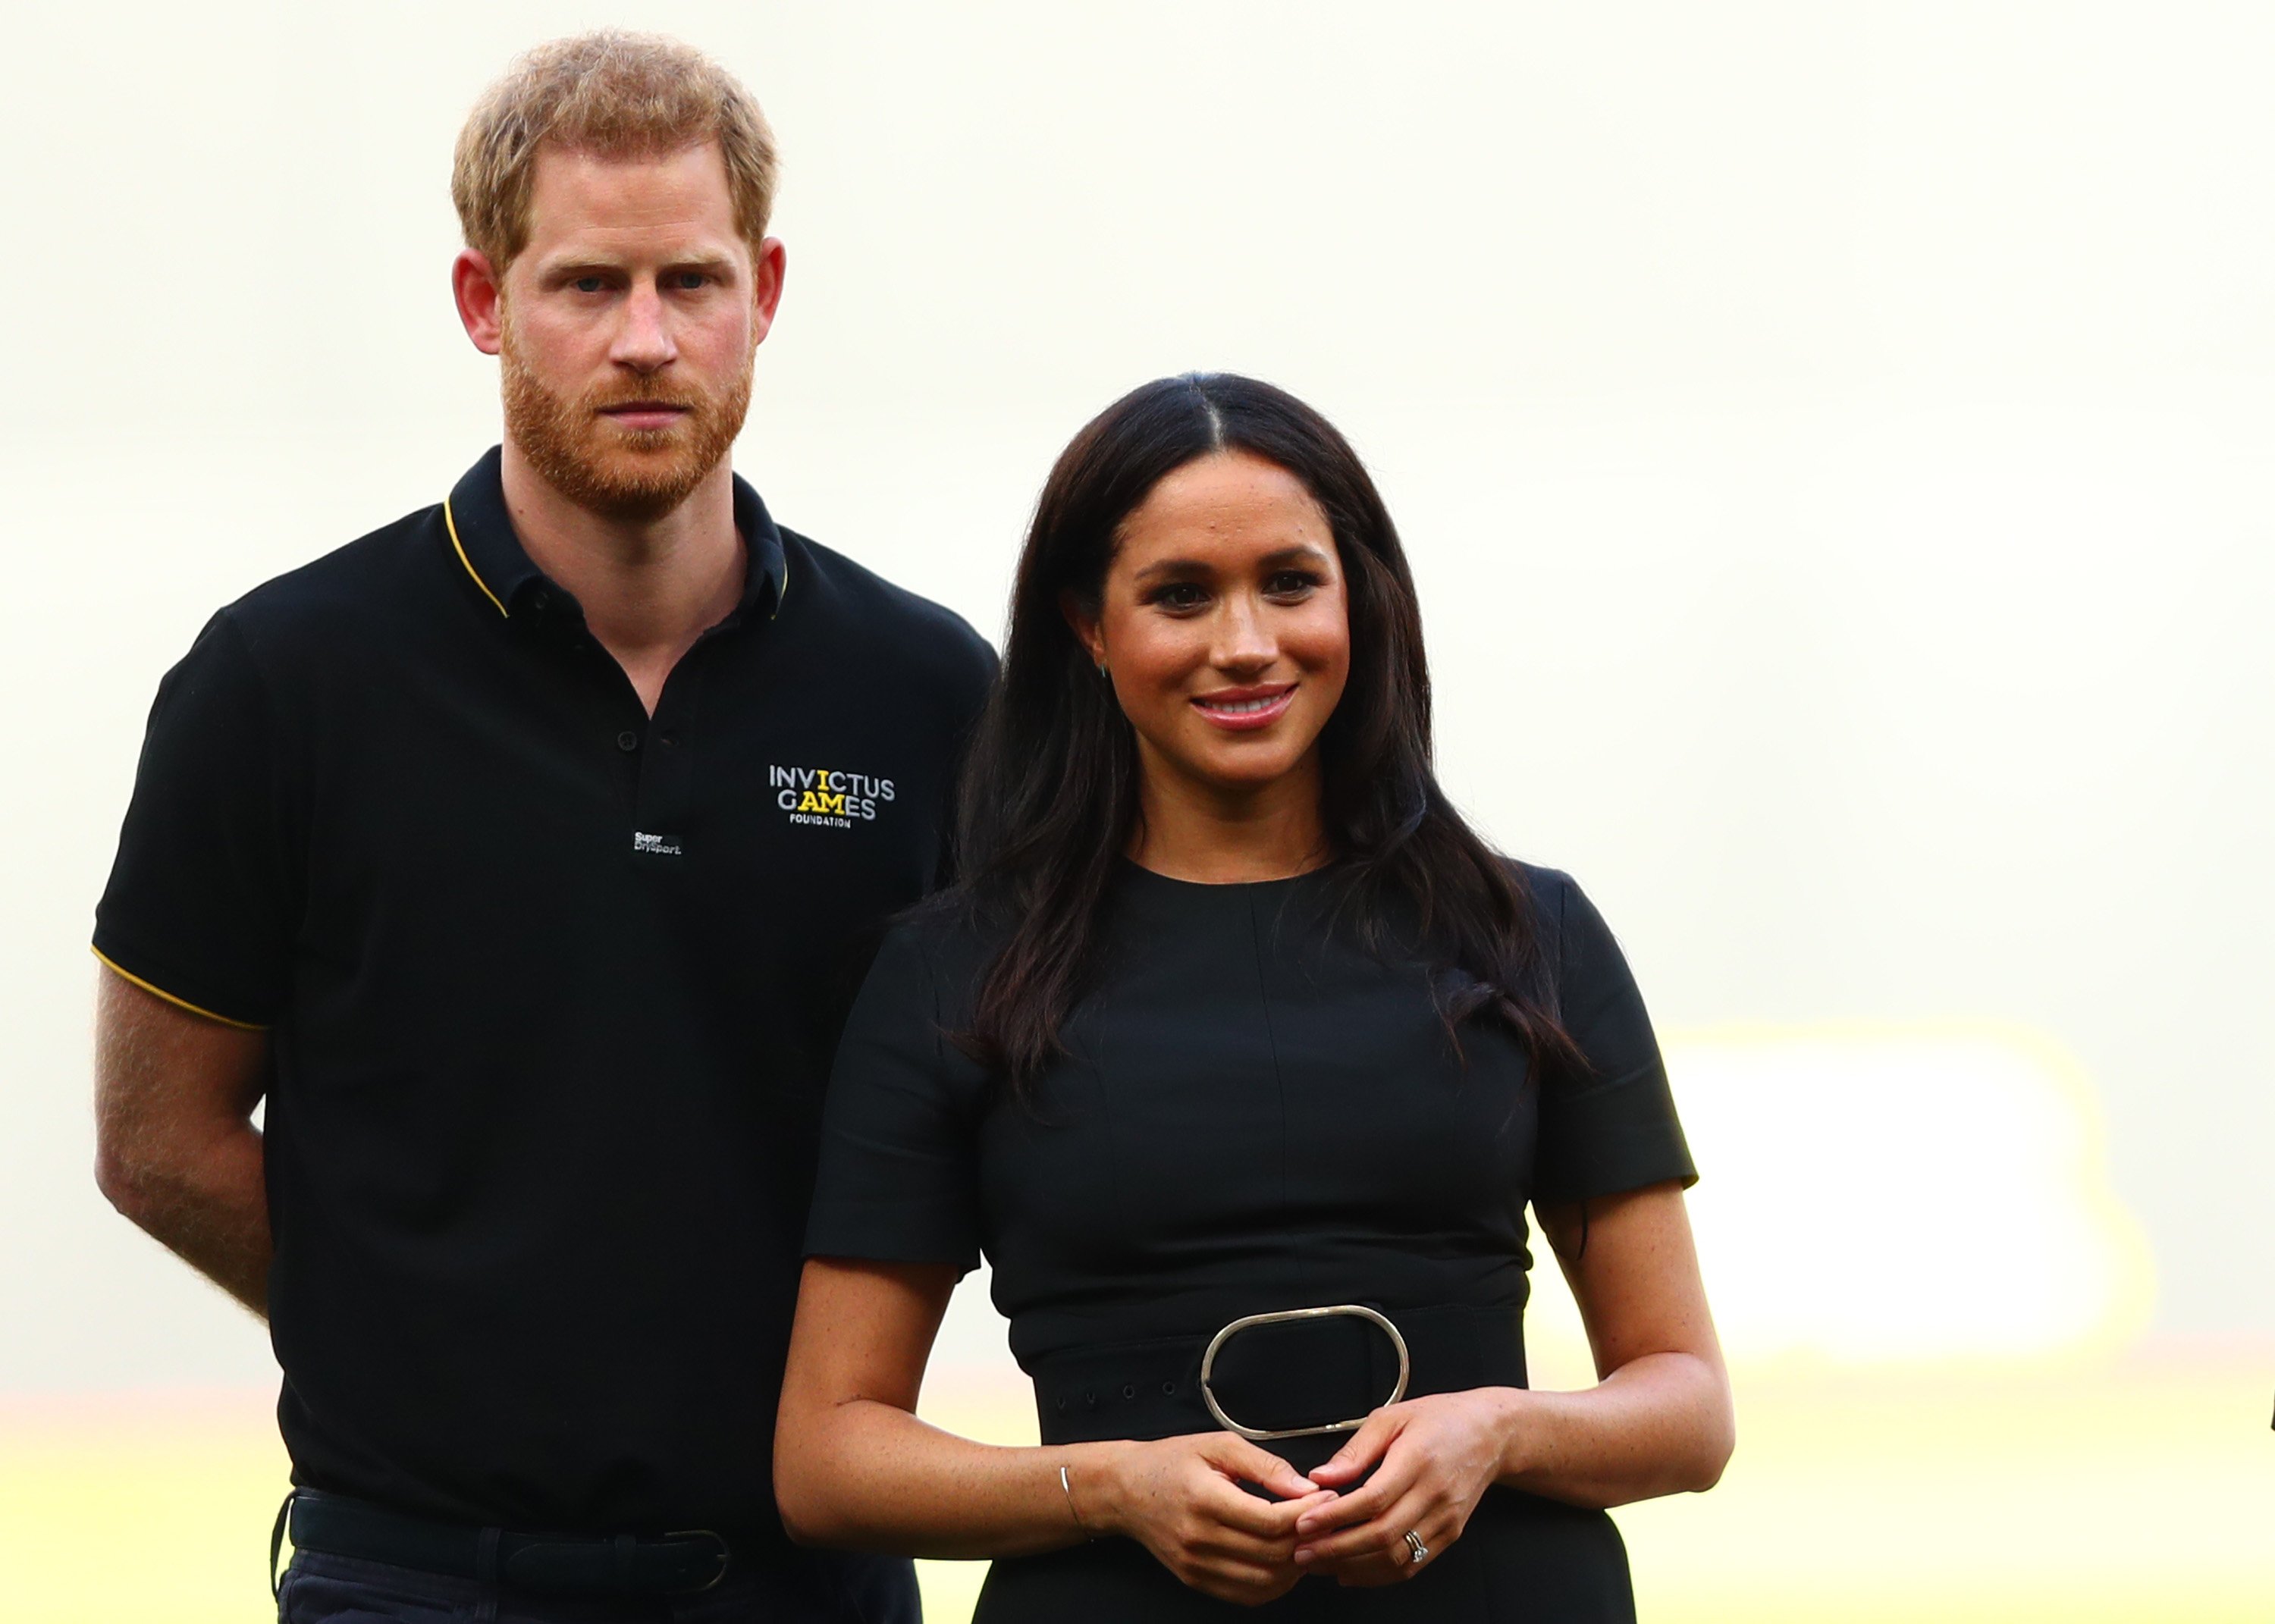 Prince Harry, Duke of Sussex and Meghan, Duchess of Sussex look on during the pre-game ceremonies before the MLB London Series game between Boston Red Sox and New York Yankees at London Stadium on June 29, 2019 | Photo: GettyImages